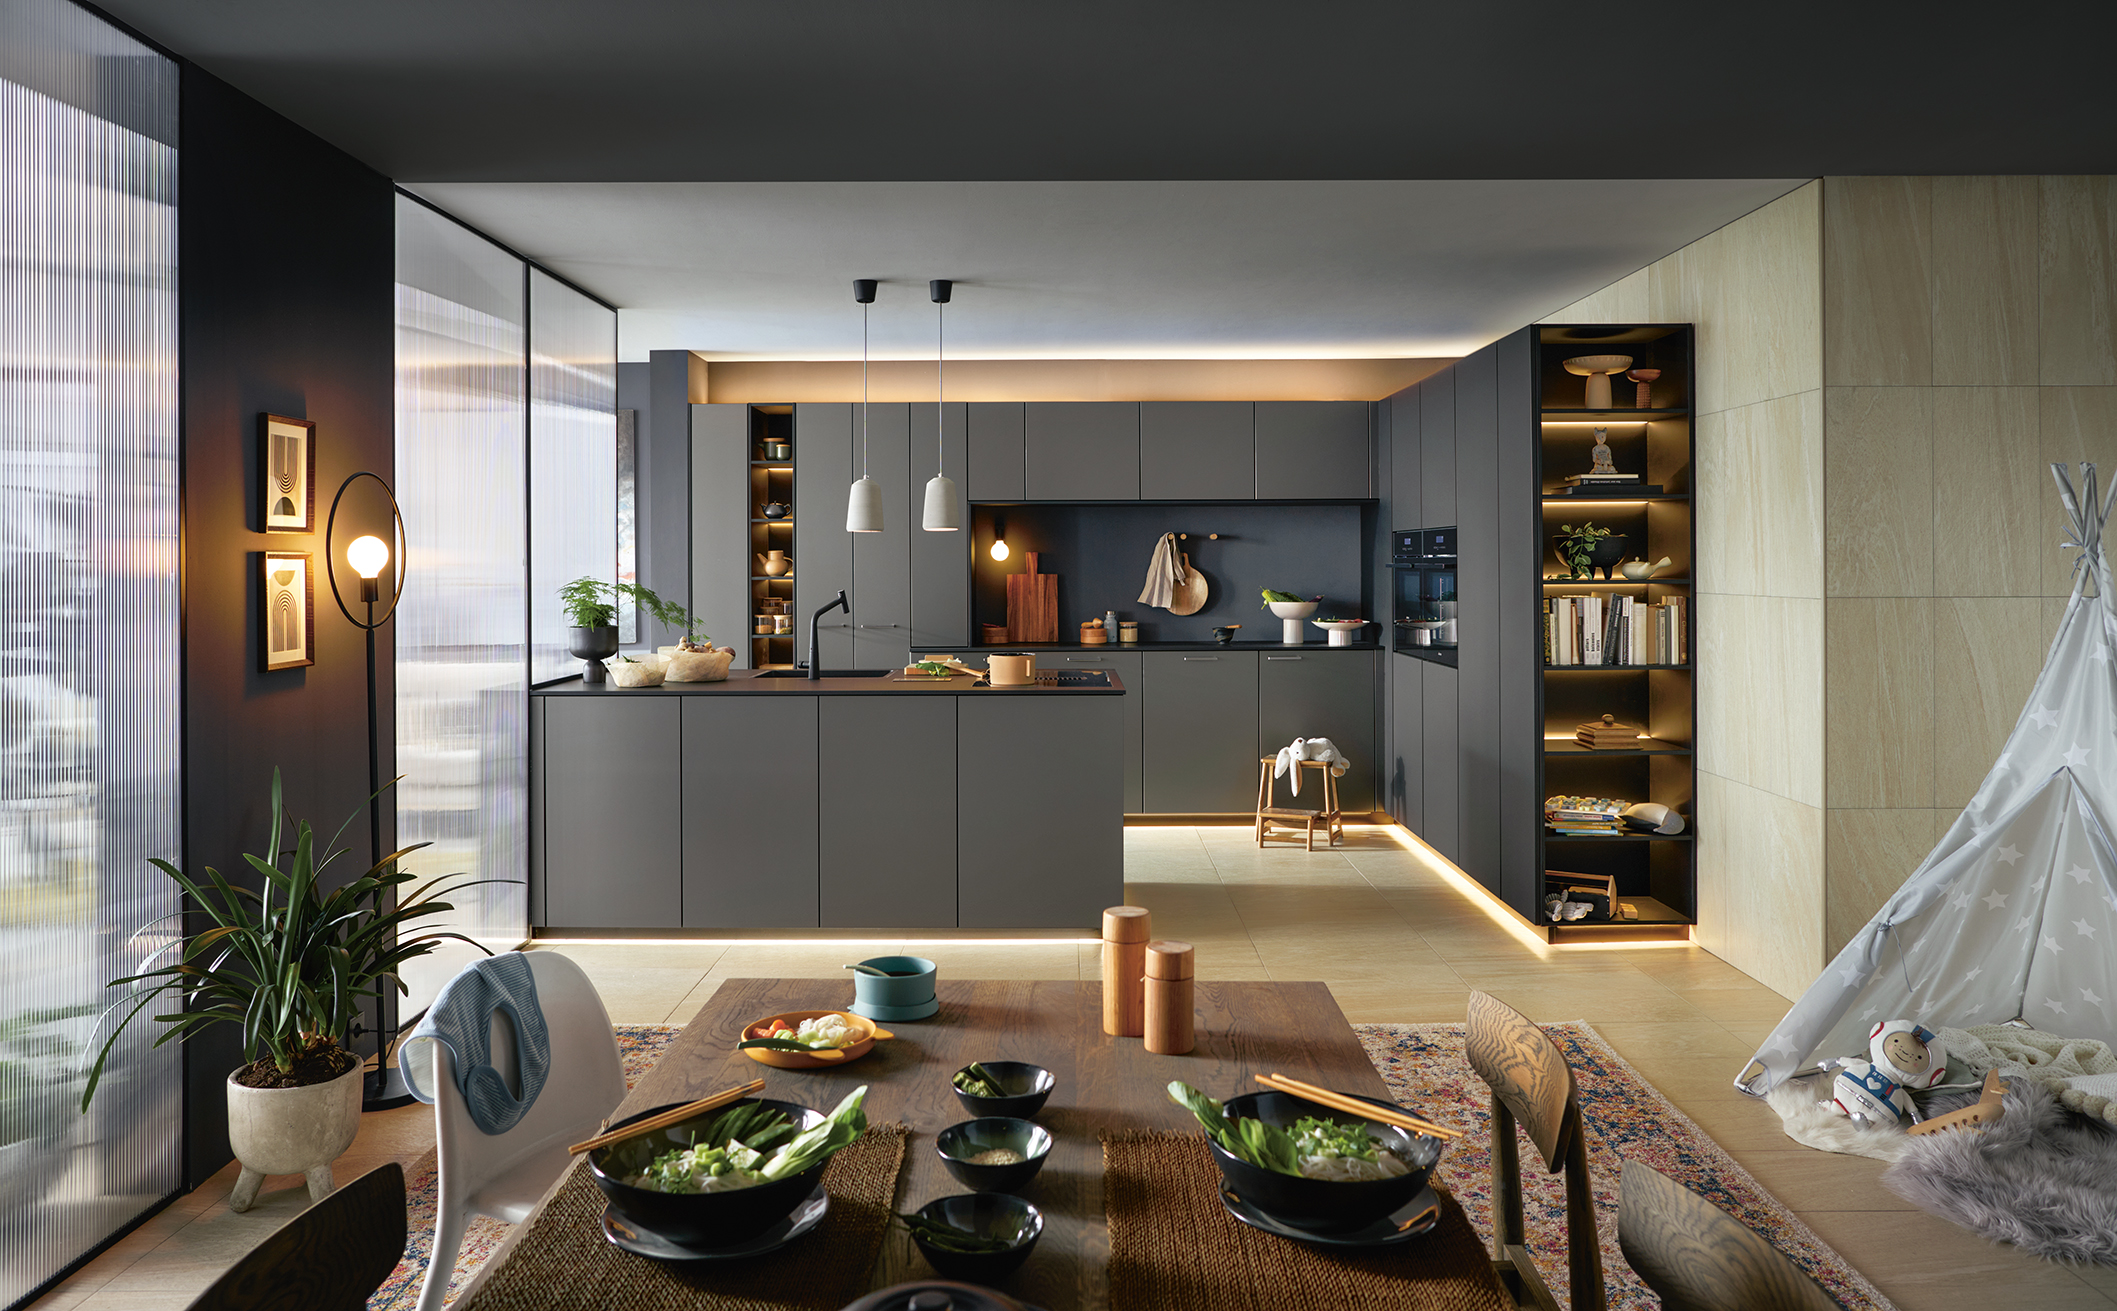 ELEVATE YOUR HOME WITH A MODULAR KITCHEN IN DUBAI